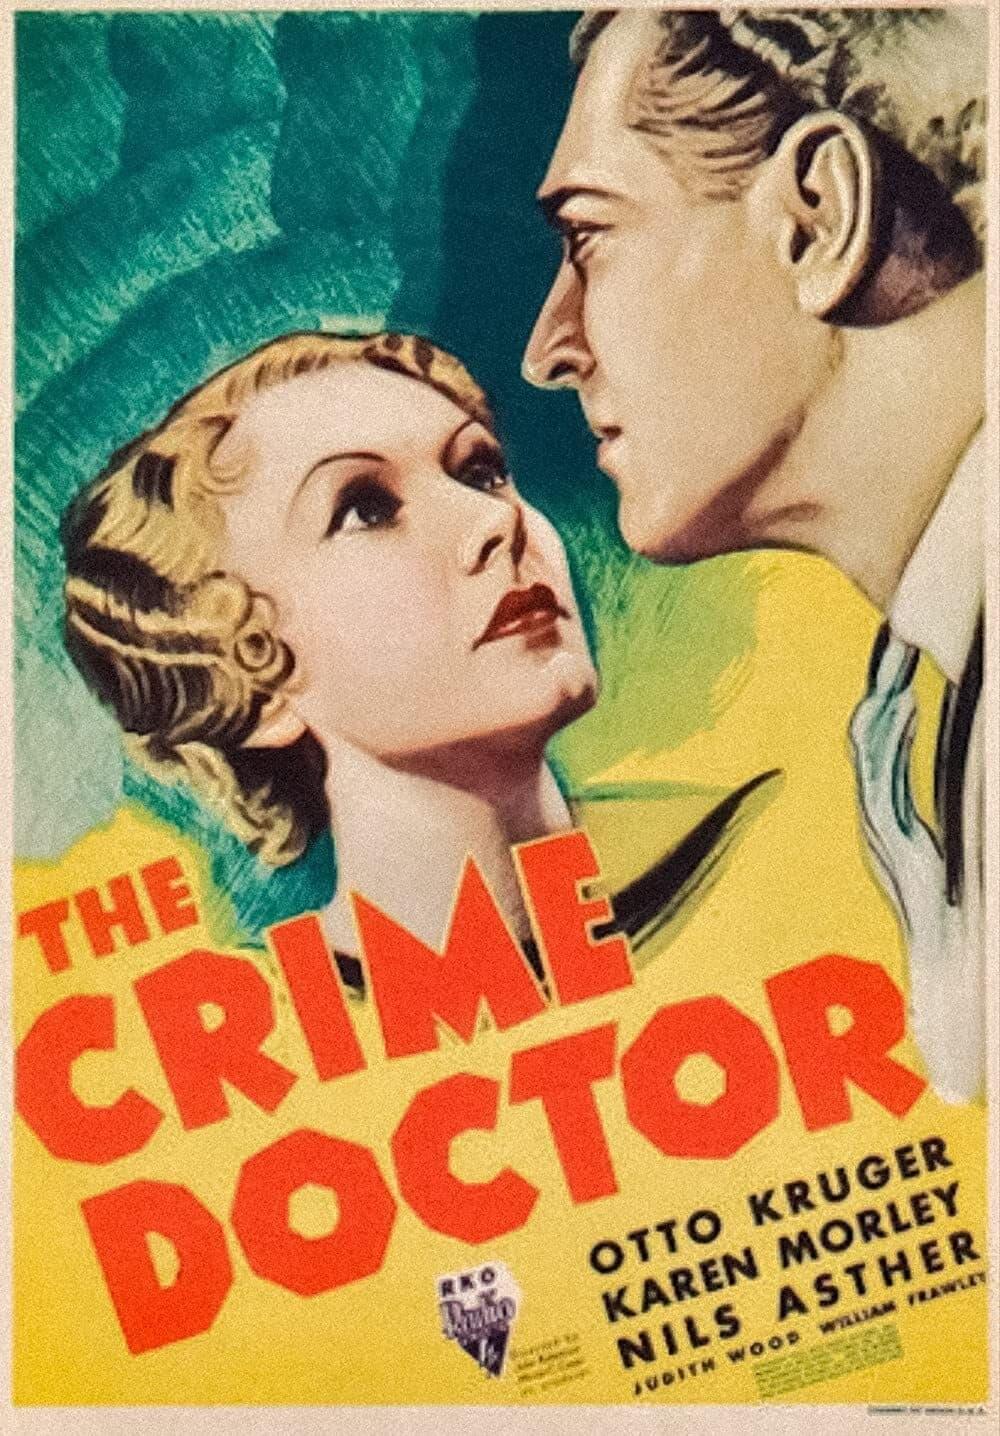 The Crime Doctor poster